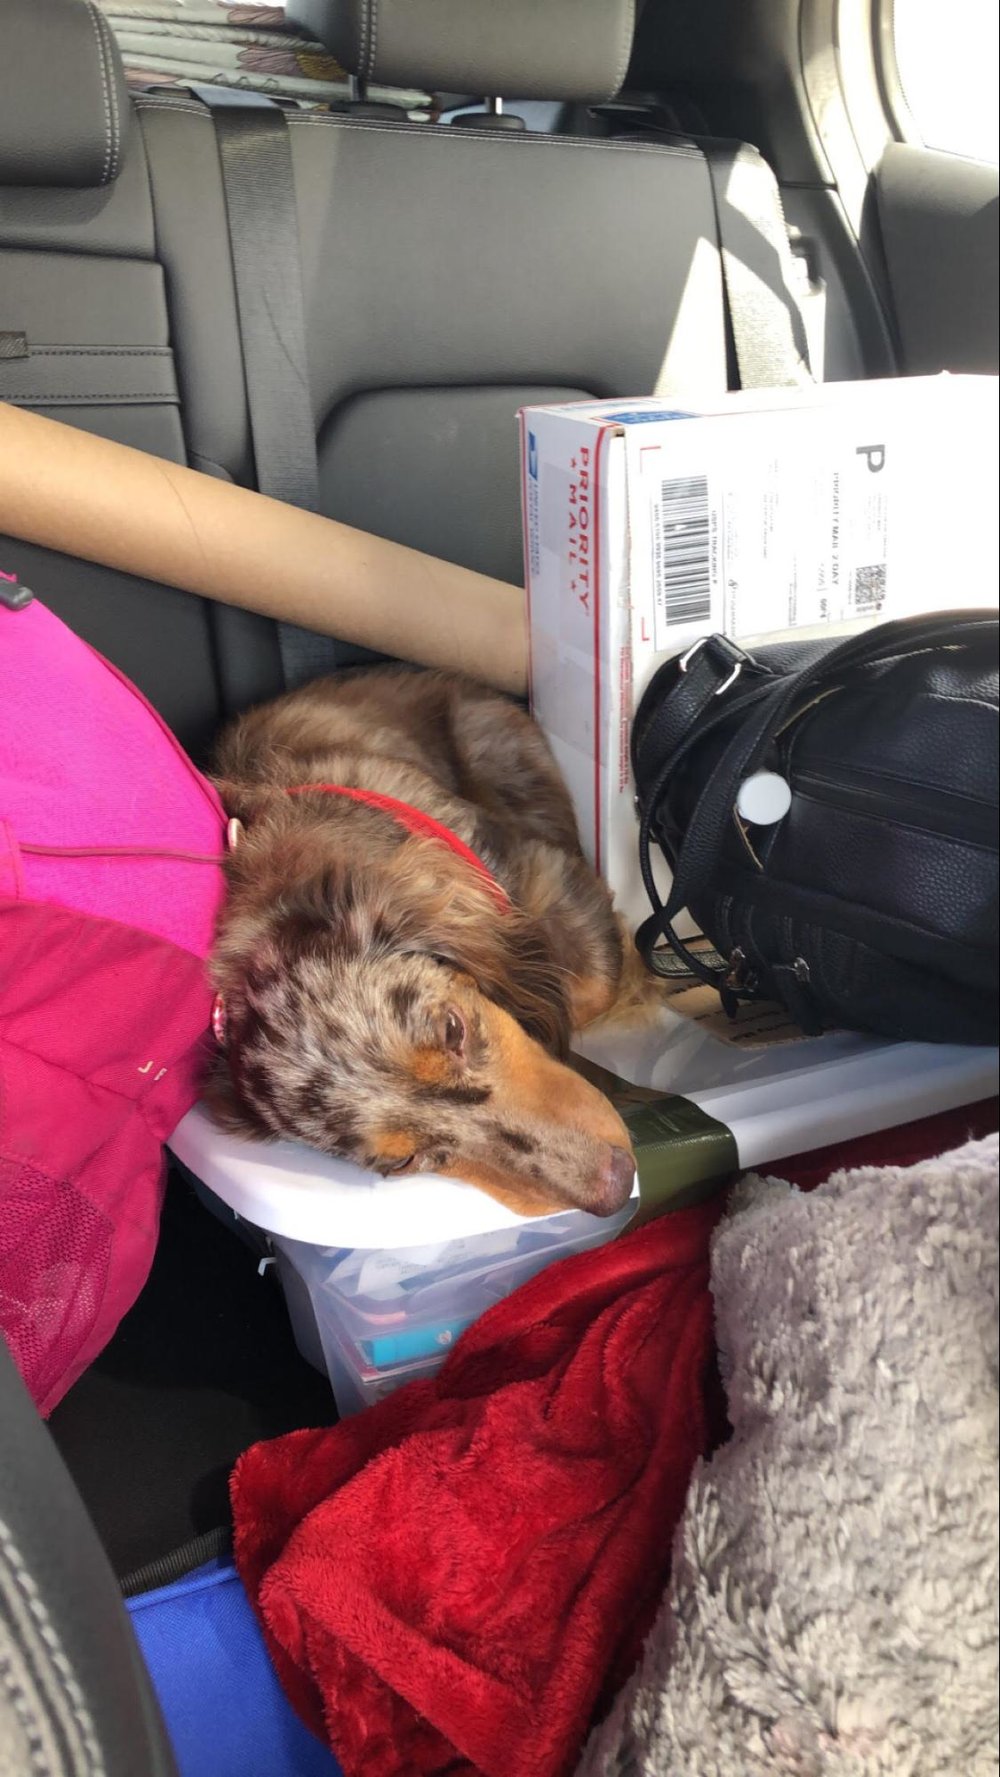 Charkie found some unique places to nap during the 10 hour drive from Oklahoma to Colorado